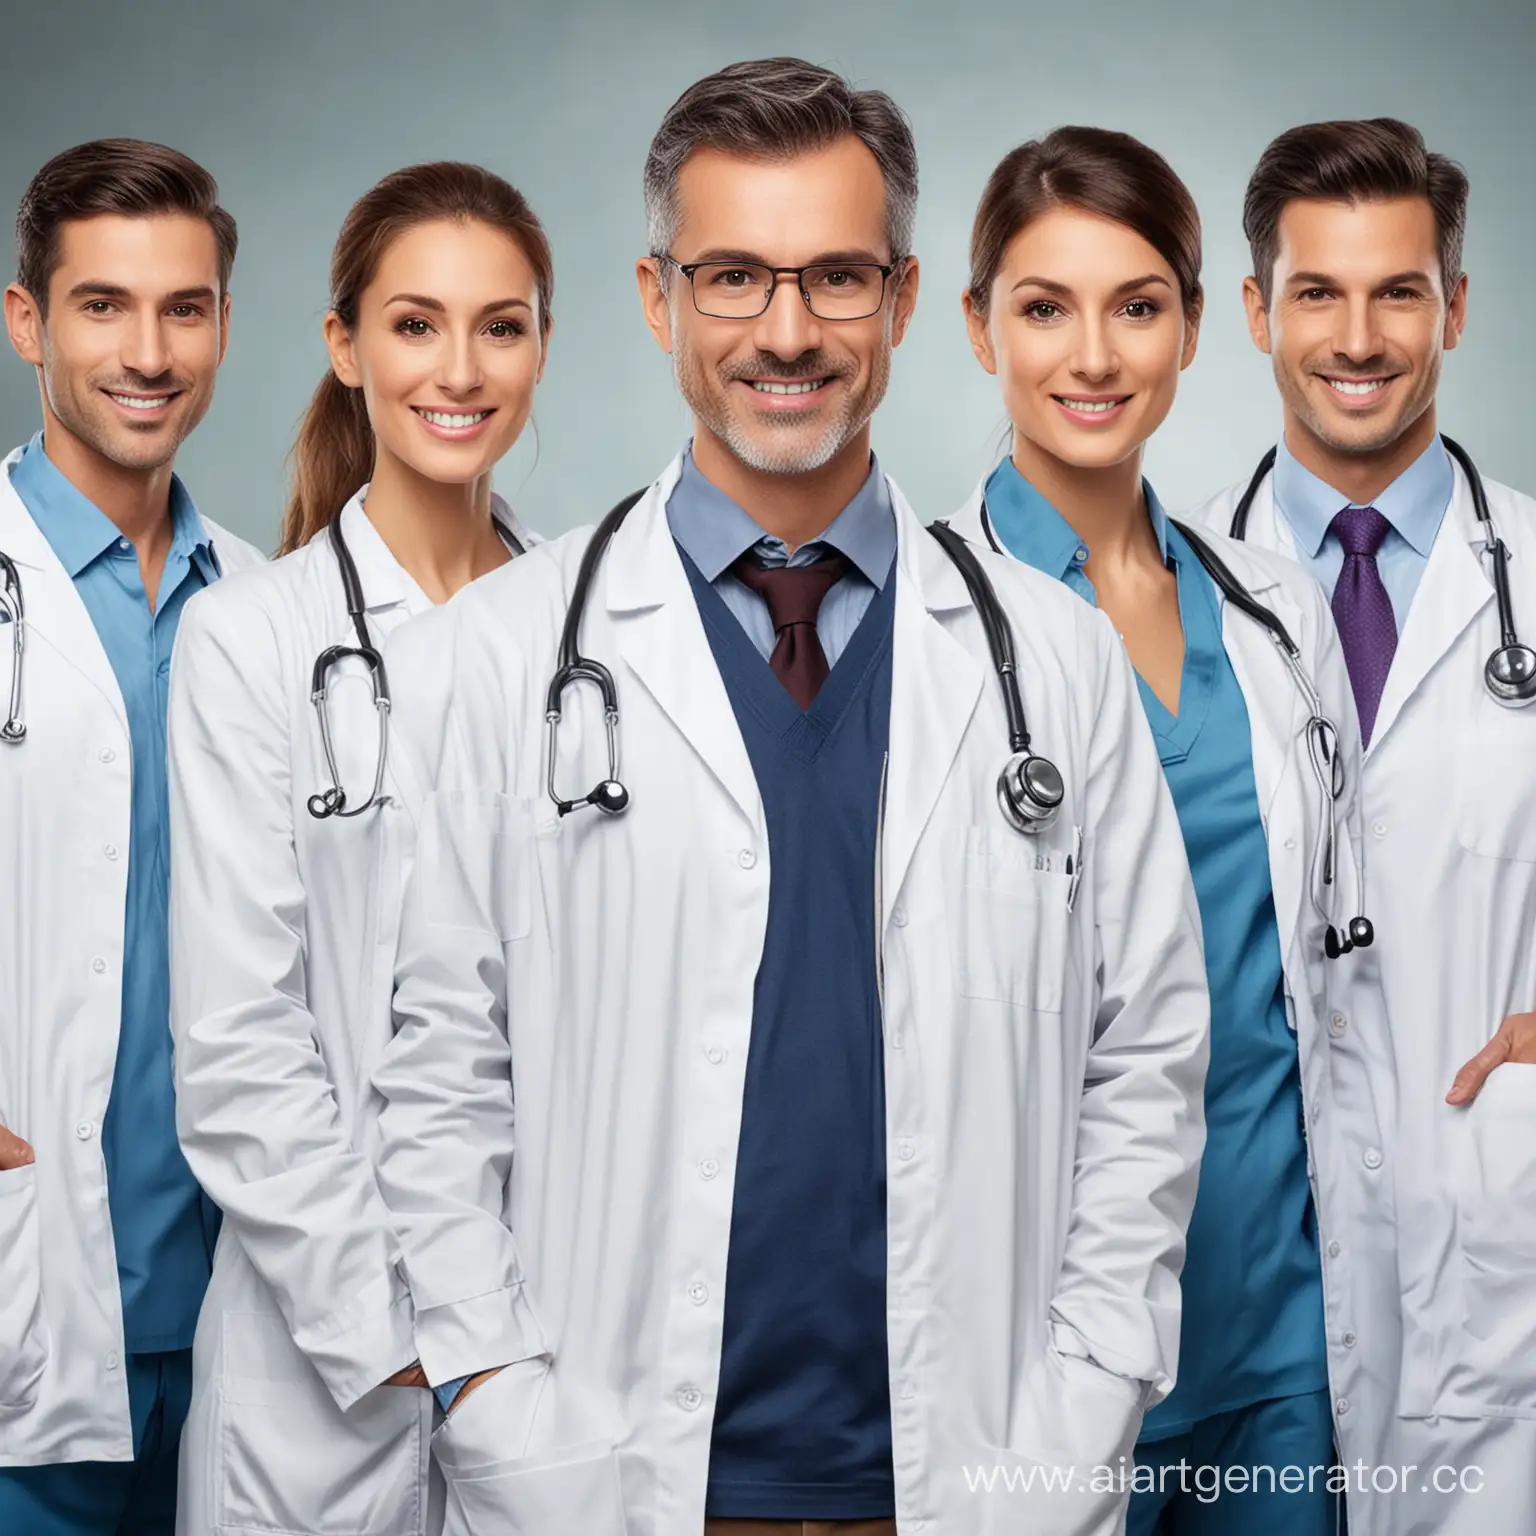 Diverse-Healthcare-Heroes-Celebrating-National-Doctors-Day-with-Colorful-Scrubs-and-Joyful-Expressions